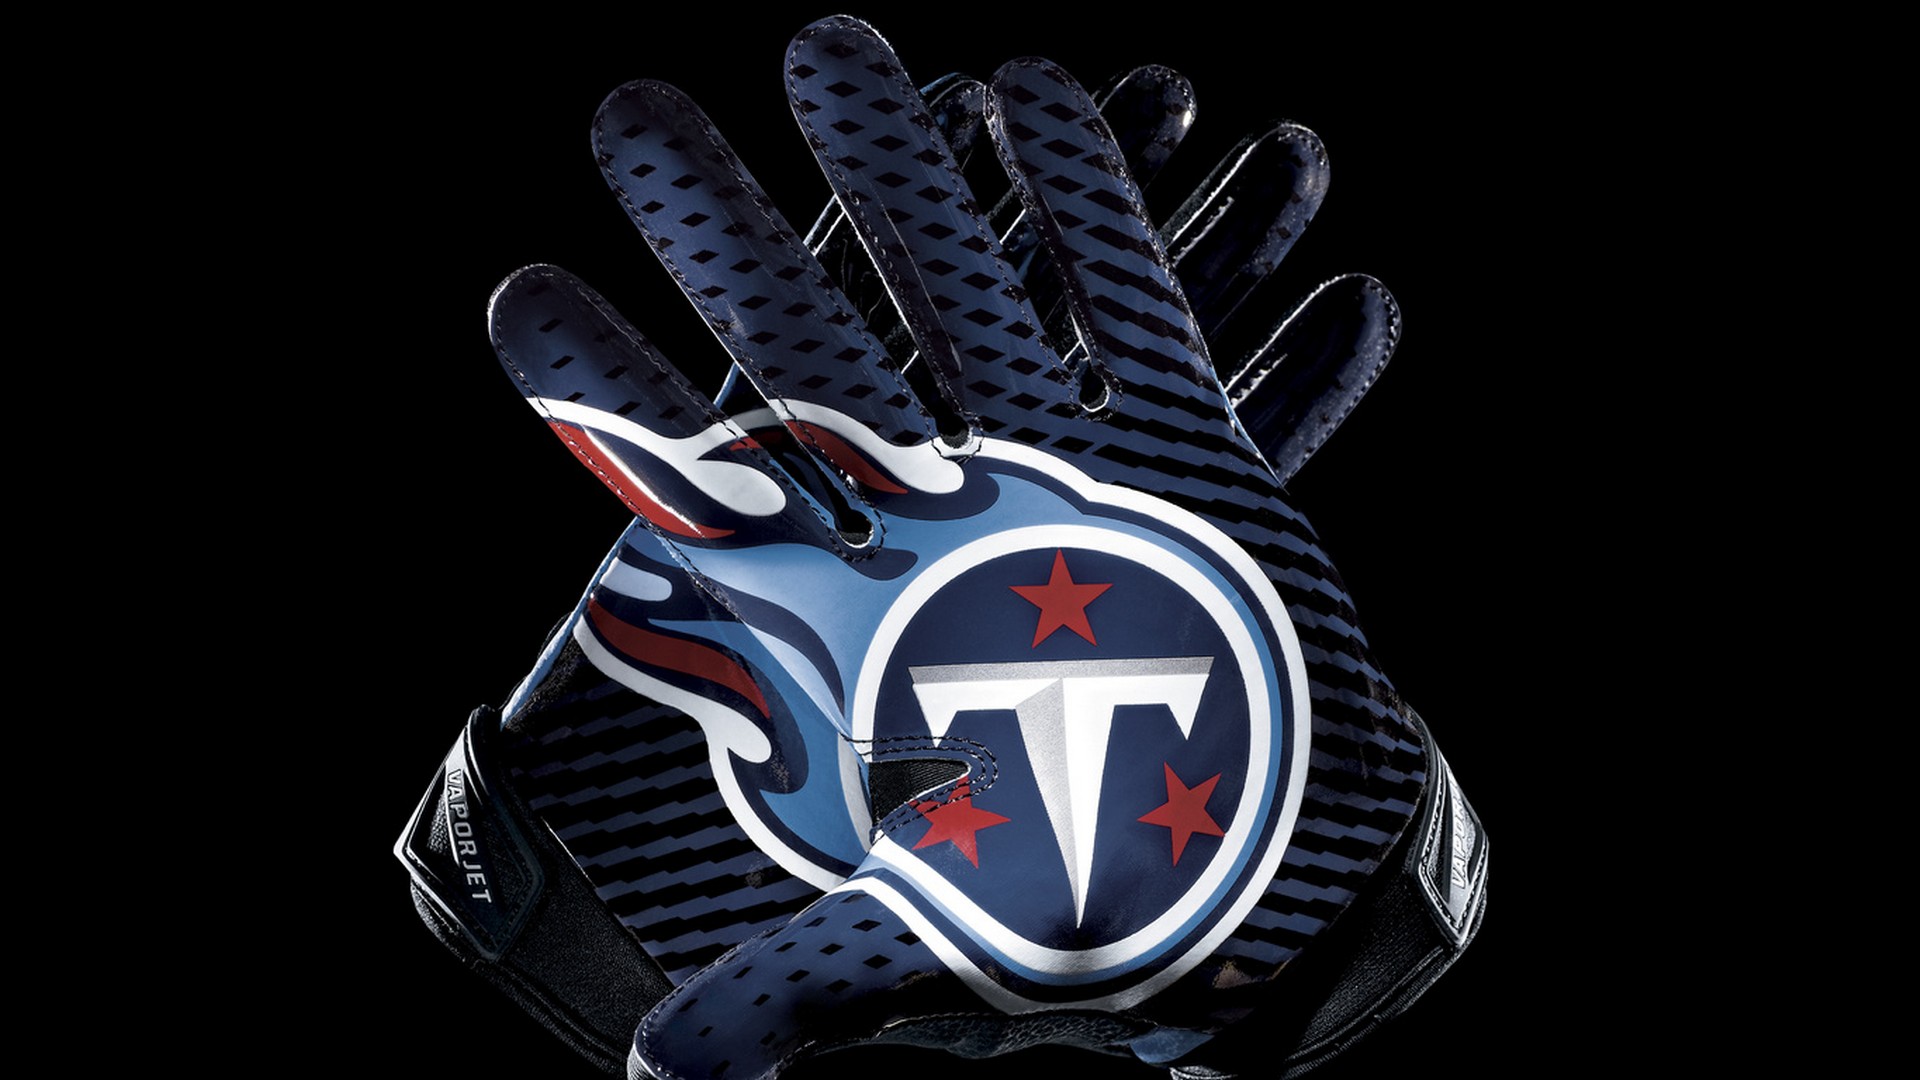 Tennessee Titans Desktop Wallpapers With high-resolution 1920X1080 pixel. You can use this wallpaper for your Mac or Windows Desktop Background, iPhone, Android or Tablet and another Smartphone device